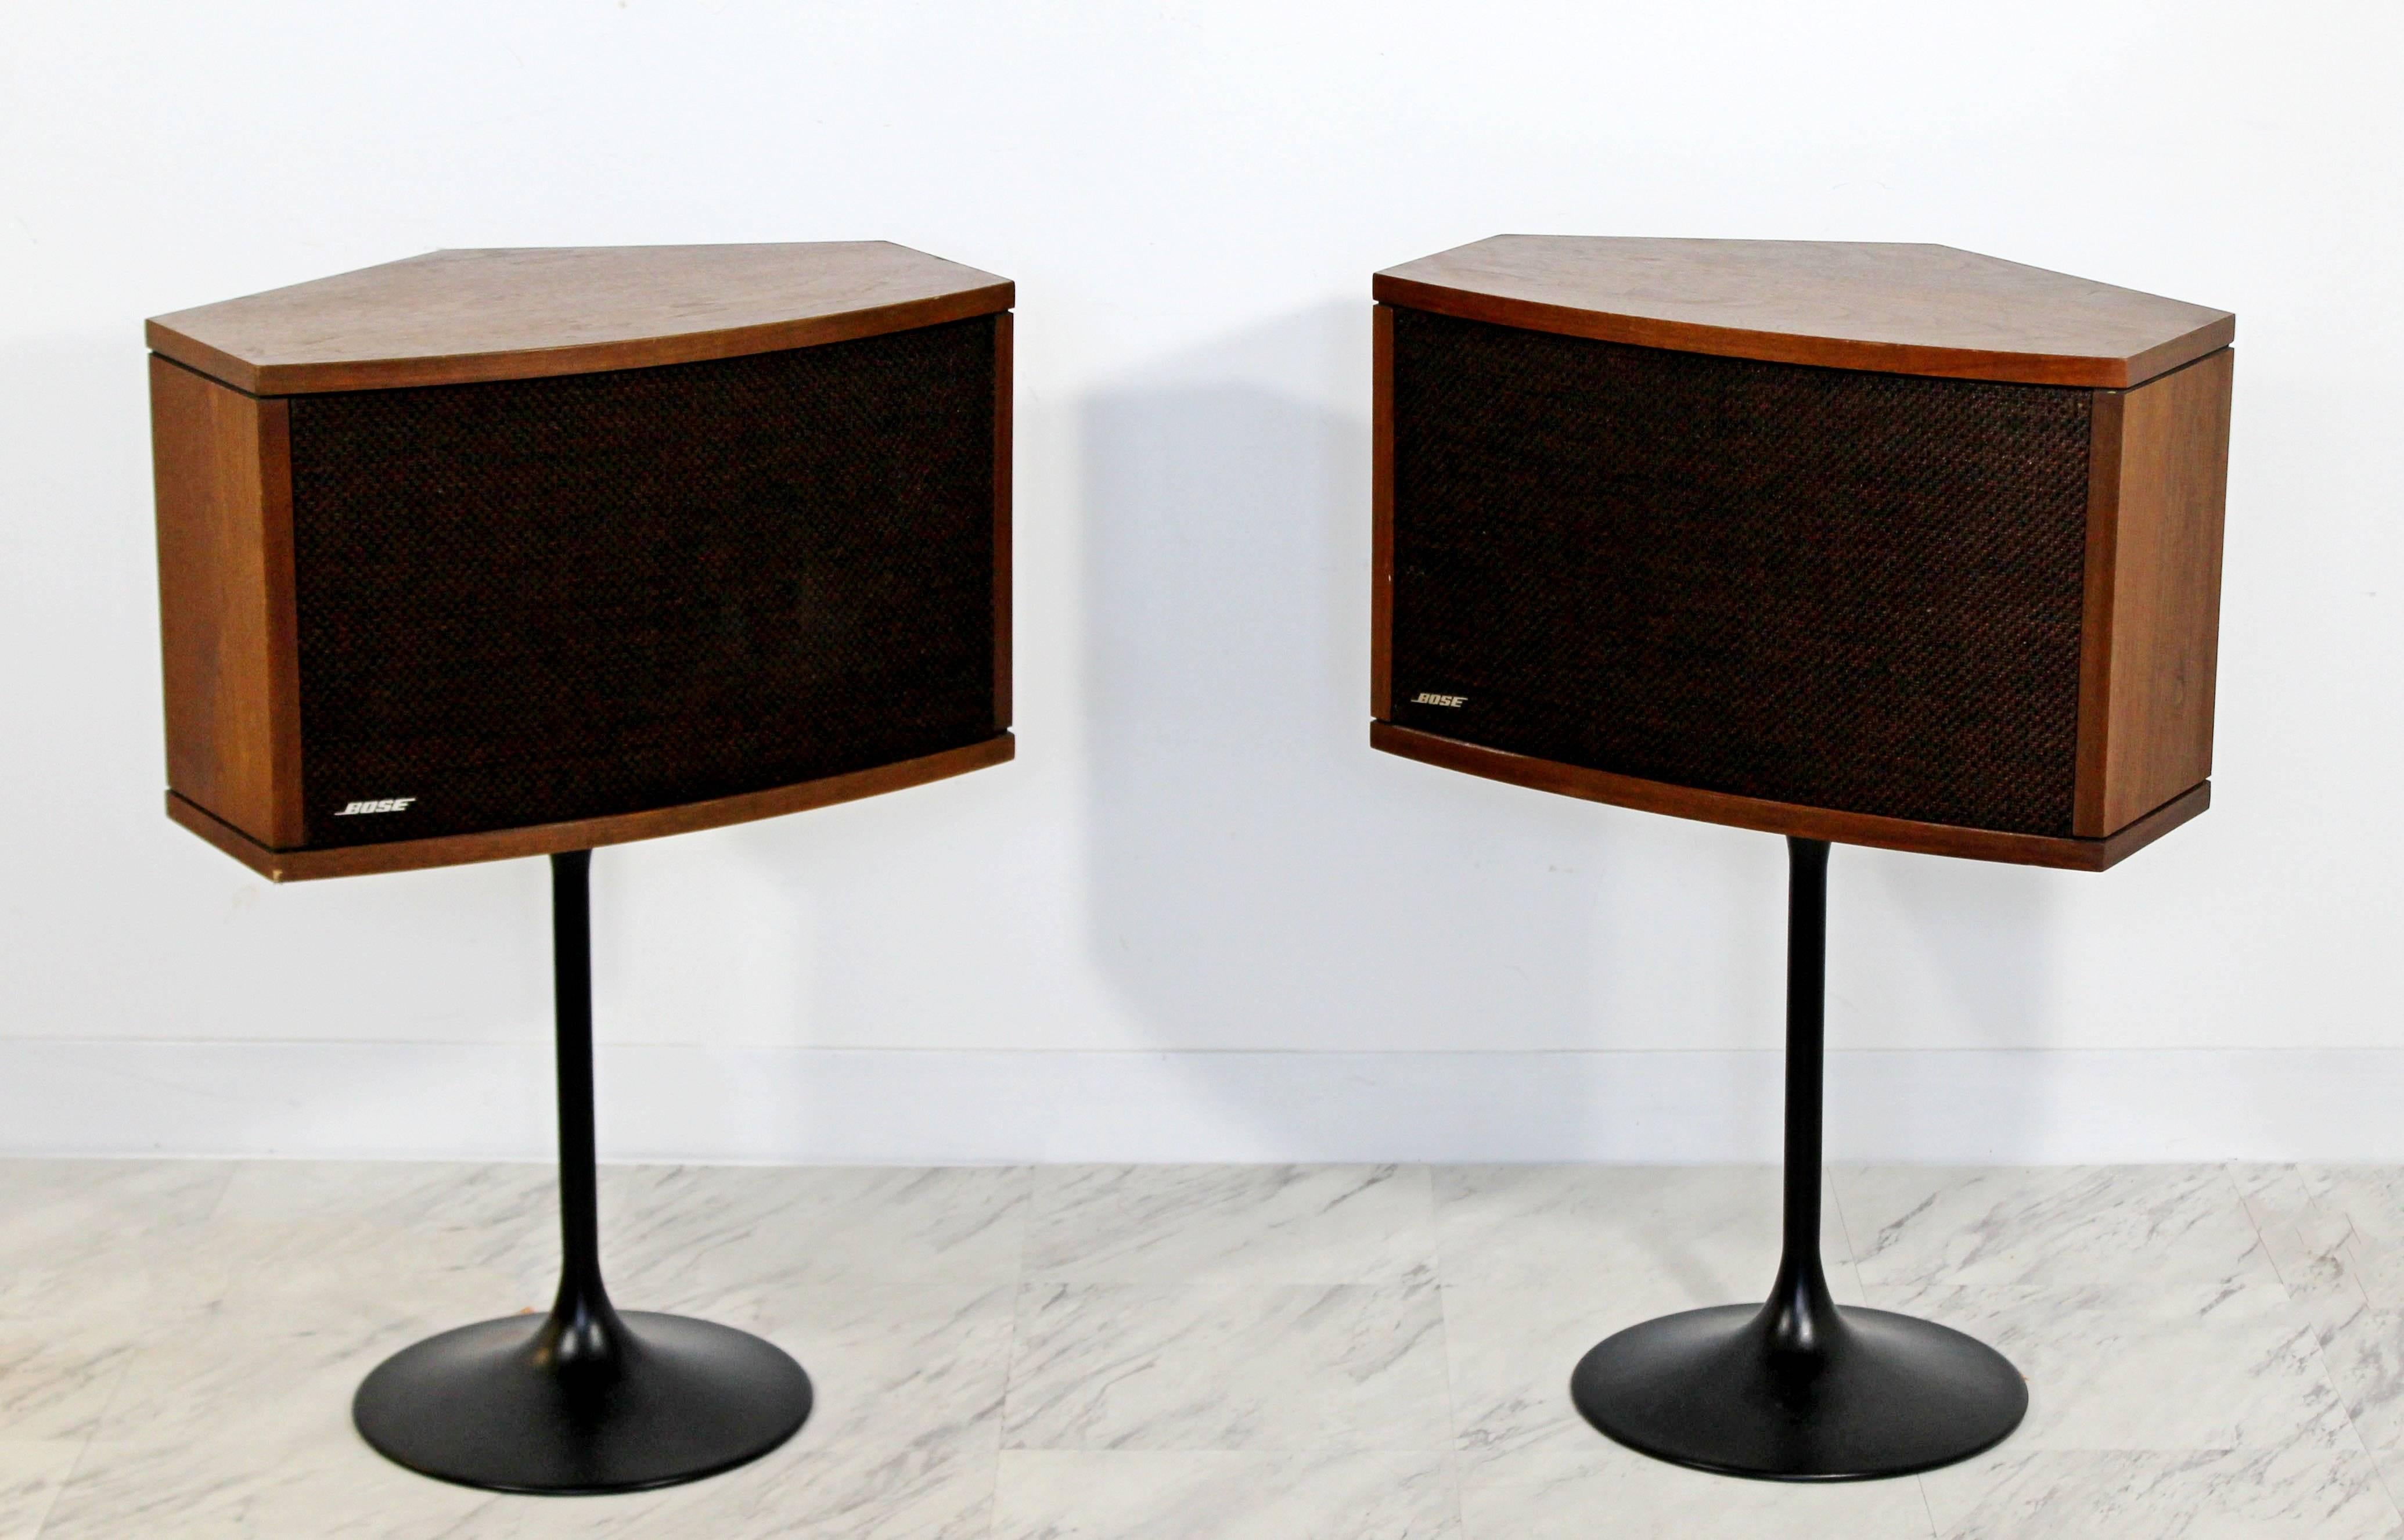 For your consideration is a gorgeous pair of standing speakers, mounted on Eero Saarinen tulip bases, by Bose, circa 1970s. In excellent condition. The dimensions are 21